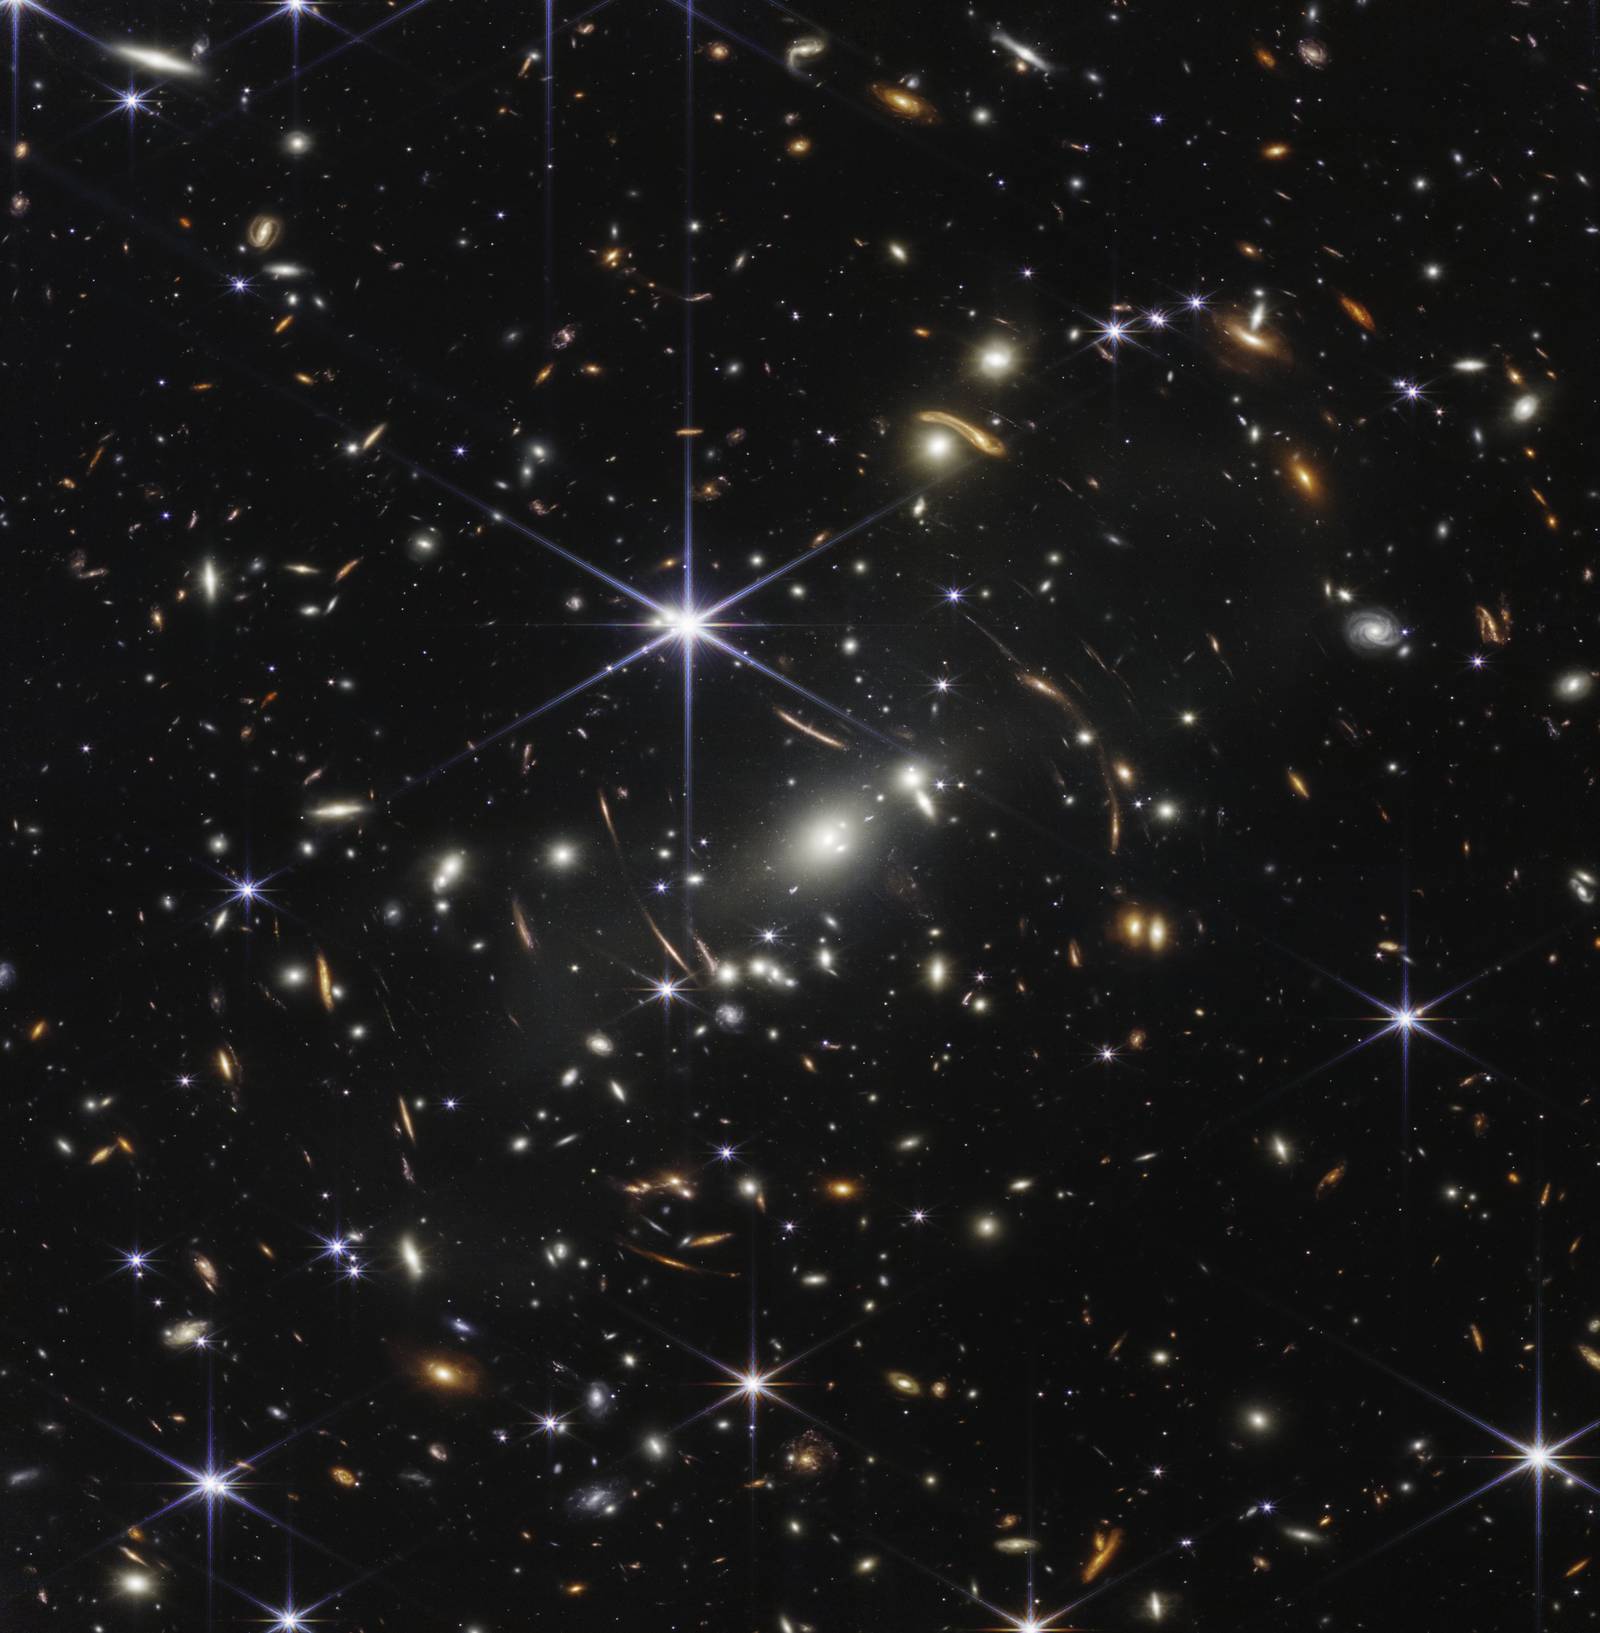 Thousands of small galaxies appear across the James Webb Space Telescope’s first deep field image. Their colours vary. Some are shades of orange, while others are white. Most appear as fuzzy ovals, but a few have distinct spiral arms. In front of the galaxies are several foreground stars. Most appear blue, and the bright stars have diffraction spikes, forming an eight-pointed star shape. There are also many thin, long, orange arcs that curve around the centre of the image.